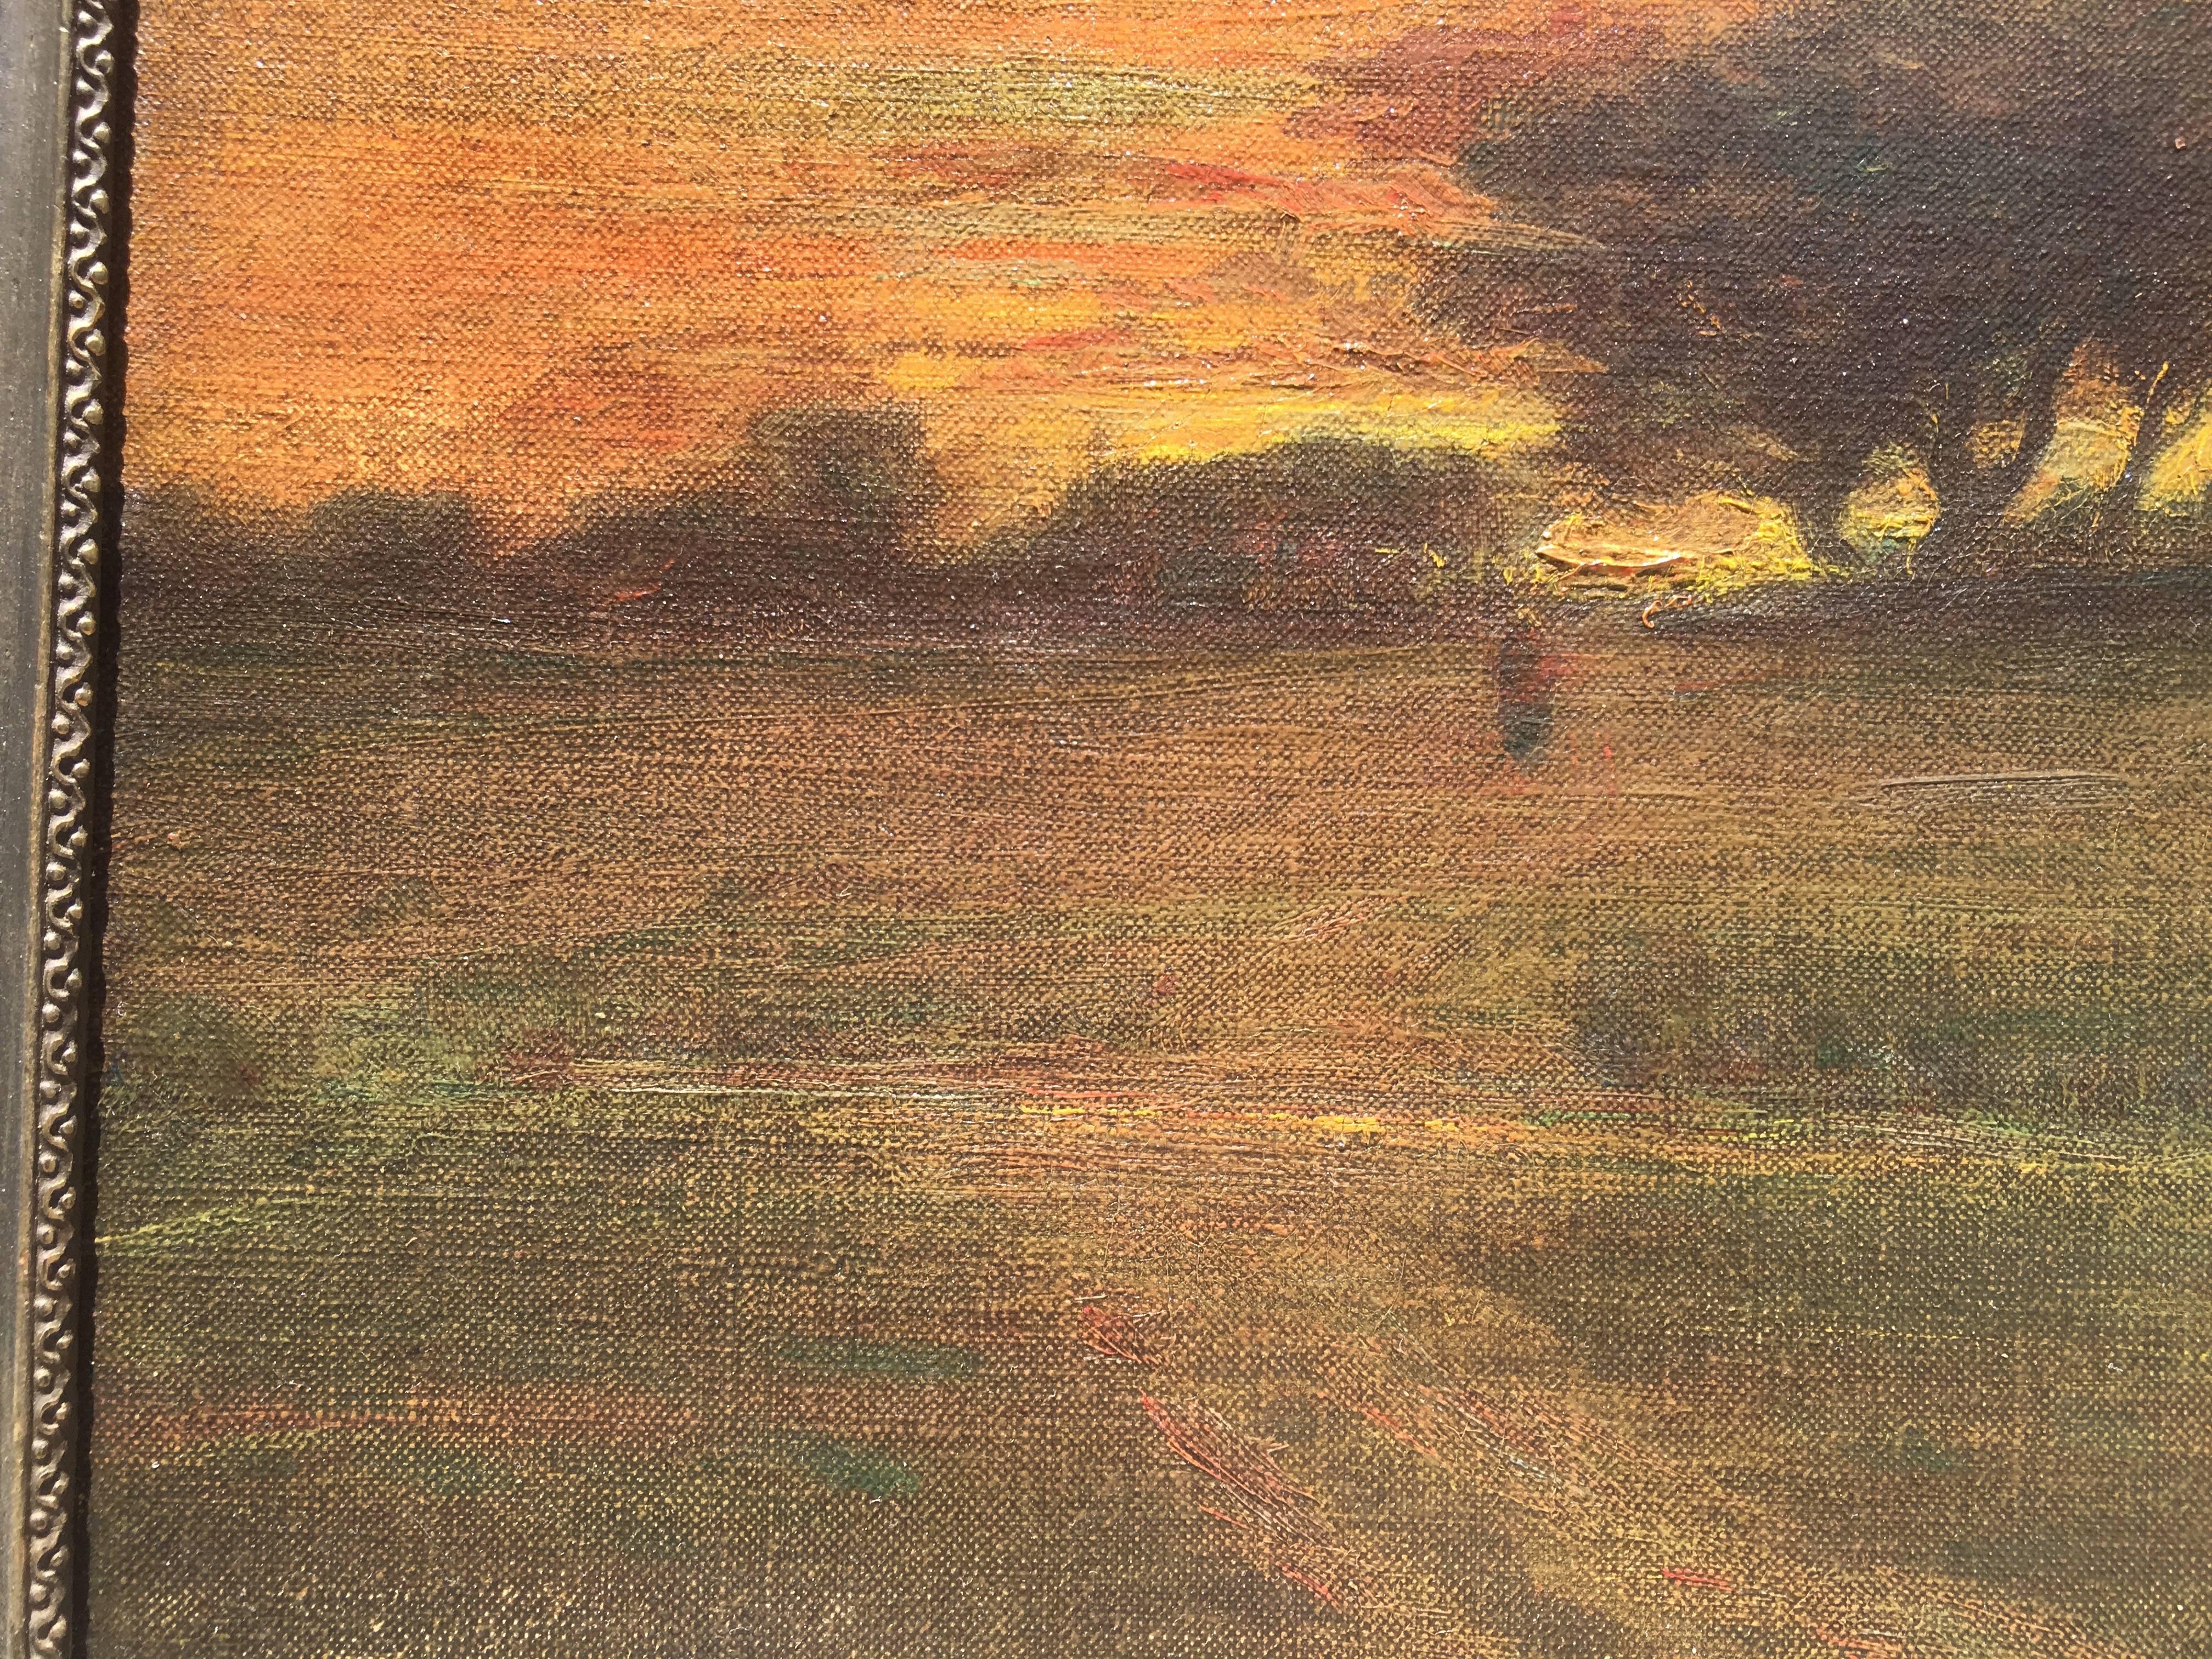 Born on a farm near Newburgh, New York, George Inness had post-Civil War recognition for paintings that were unique in structure and atmosphere and that turned away from the dramatic, panoramic Hudson River School of painting to a quieter, tonalist